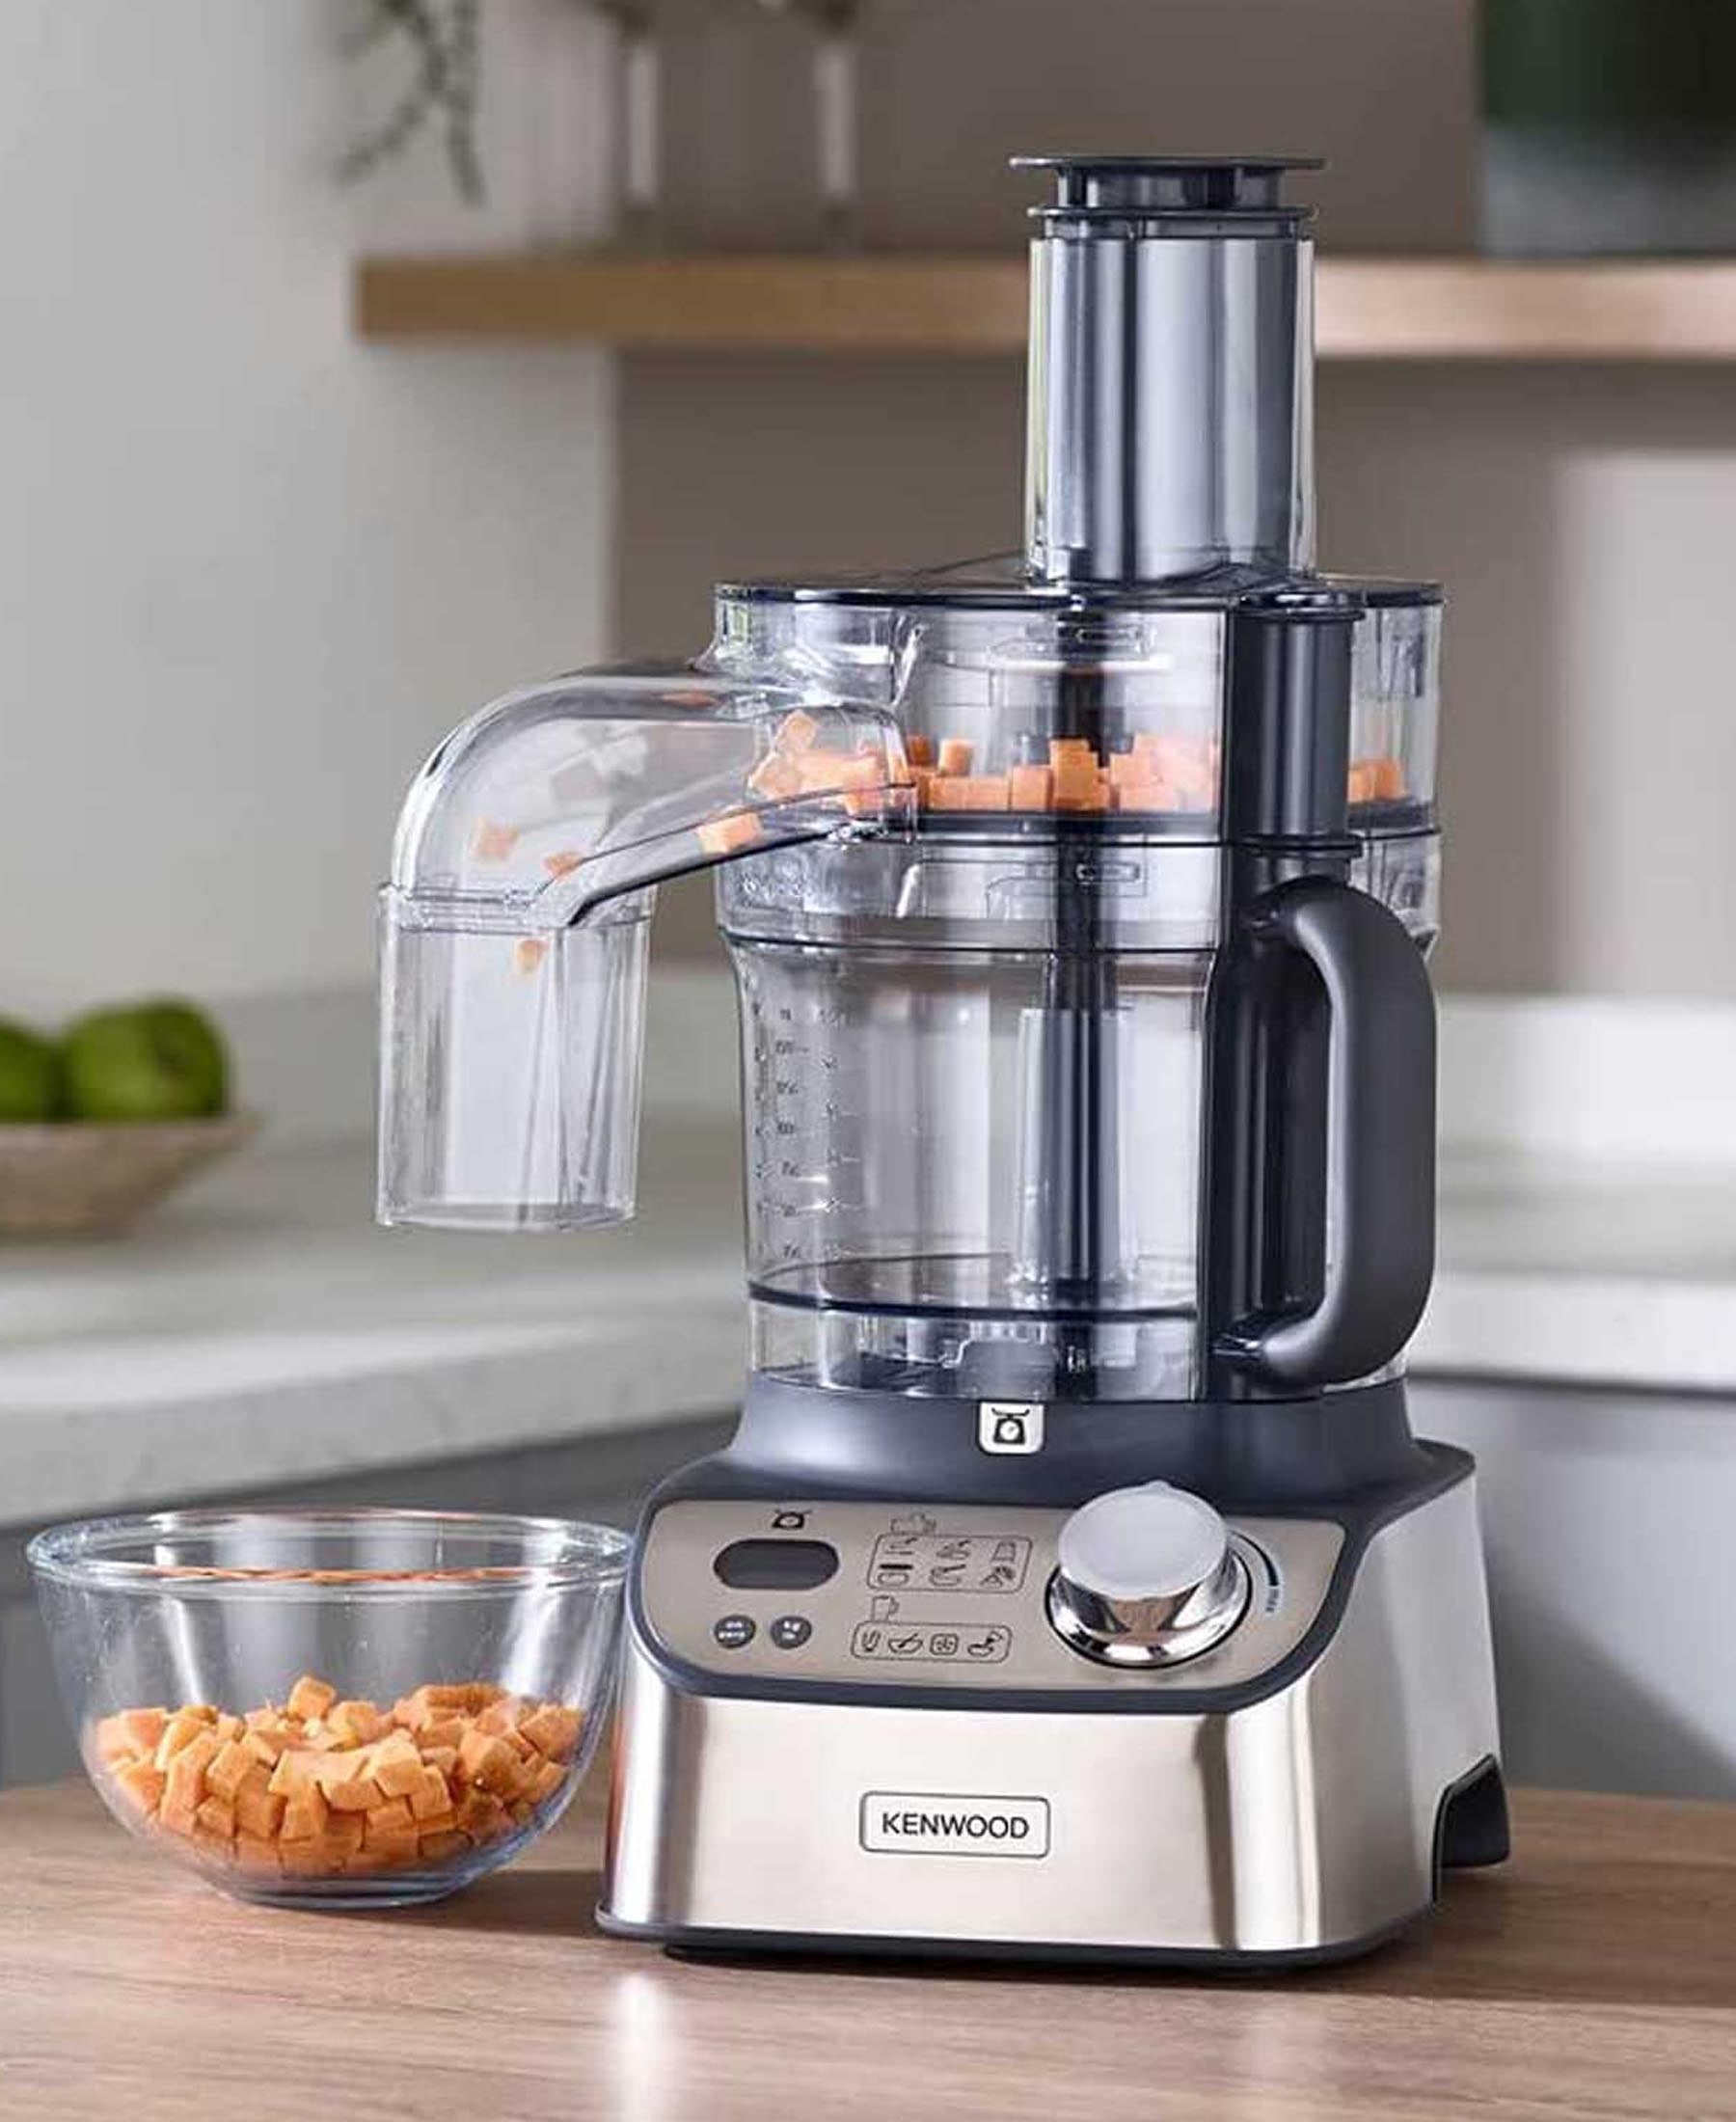 Kenwood MultiPro Express Weigh+ 3L Food Processor - Silver